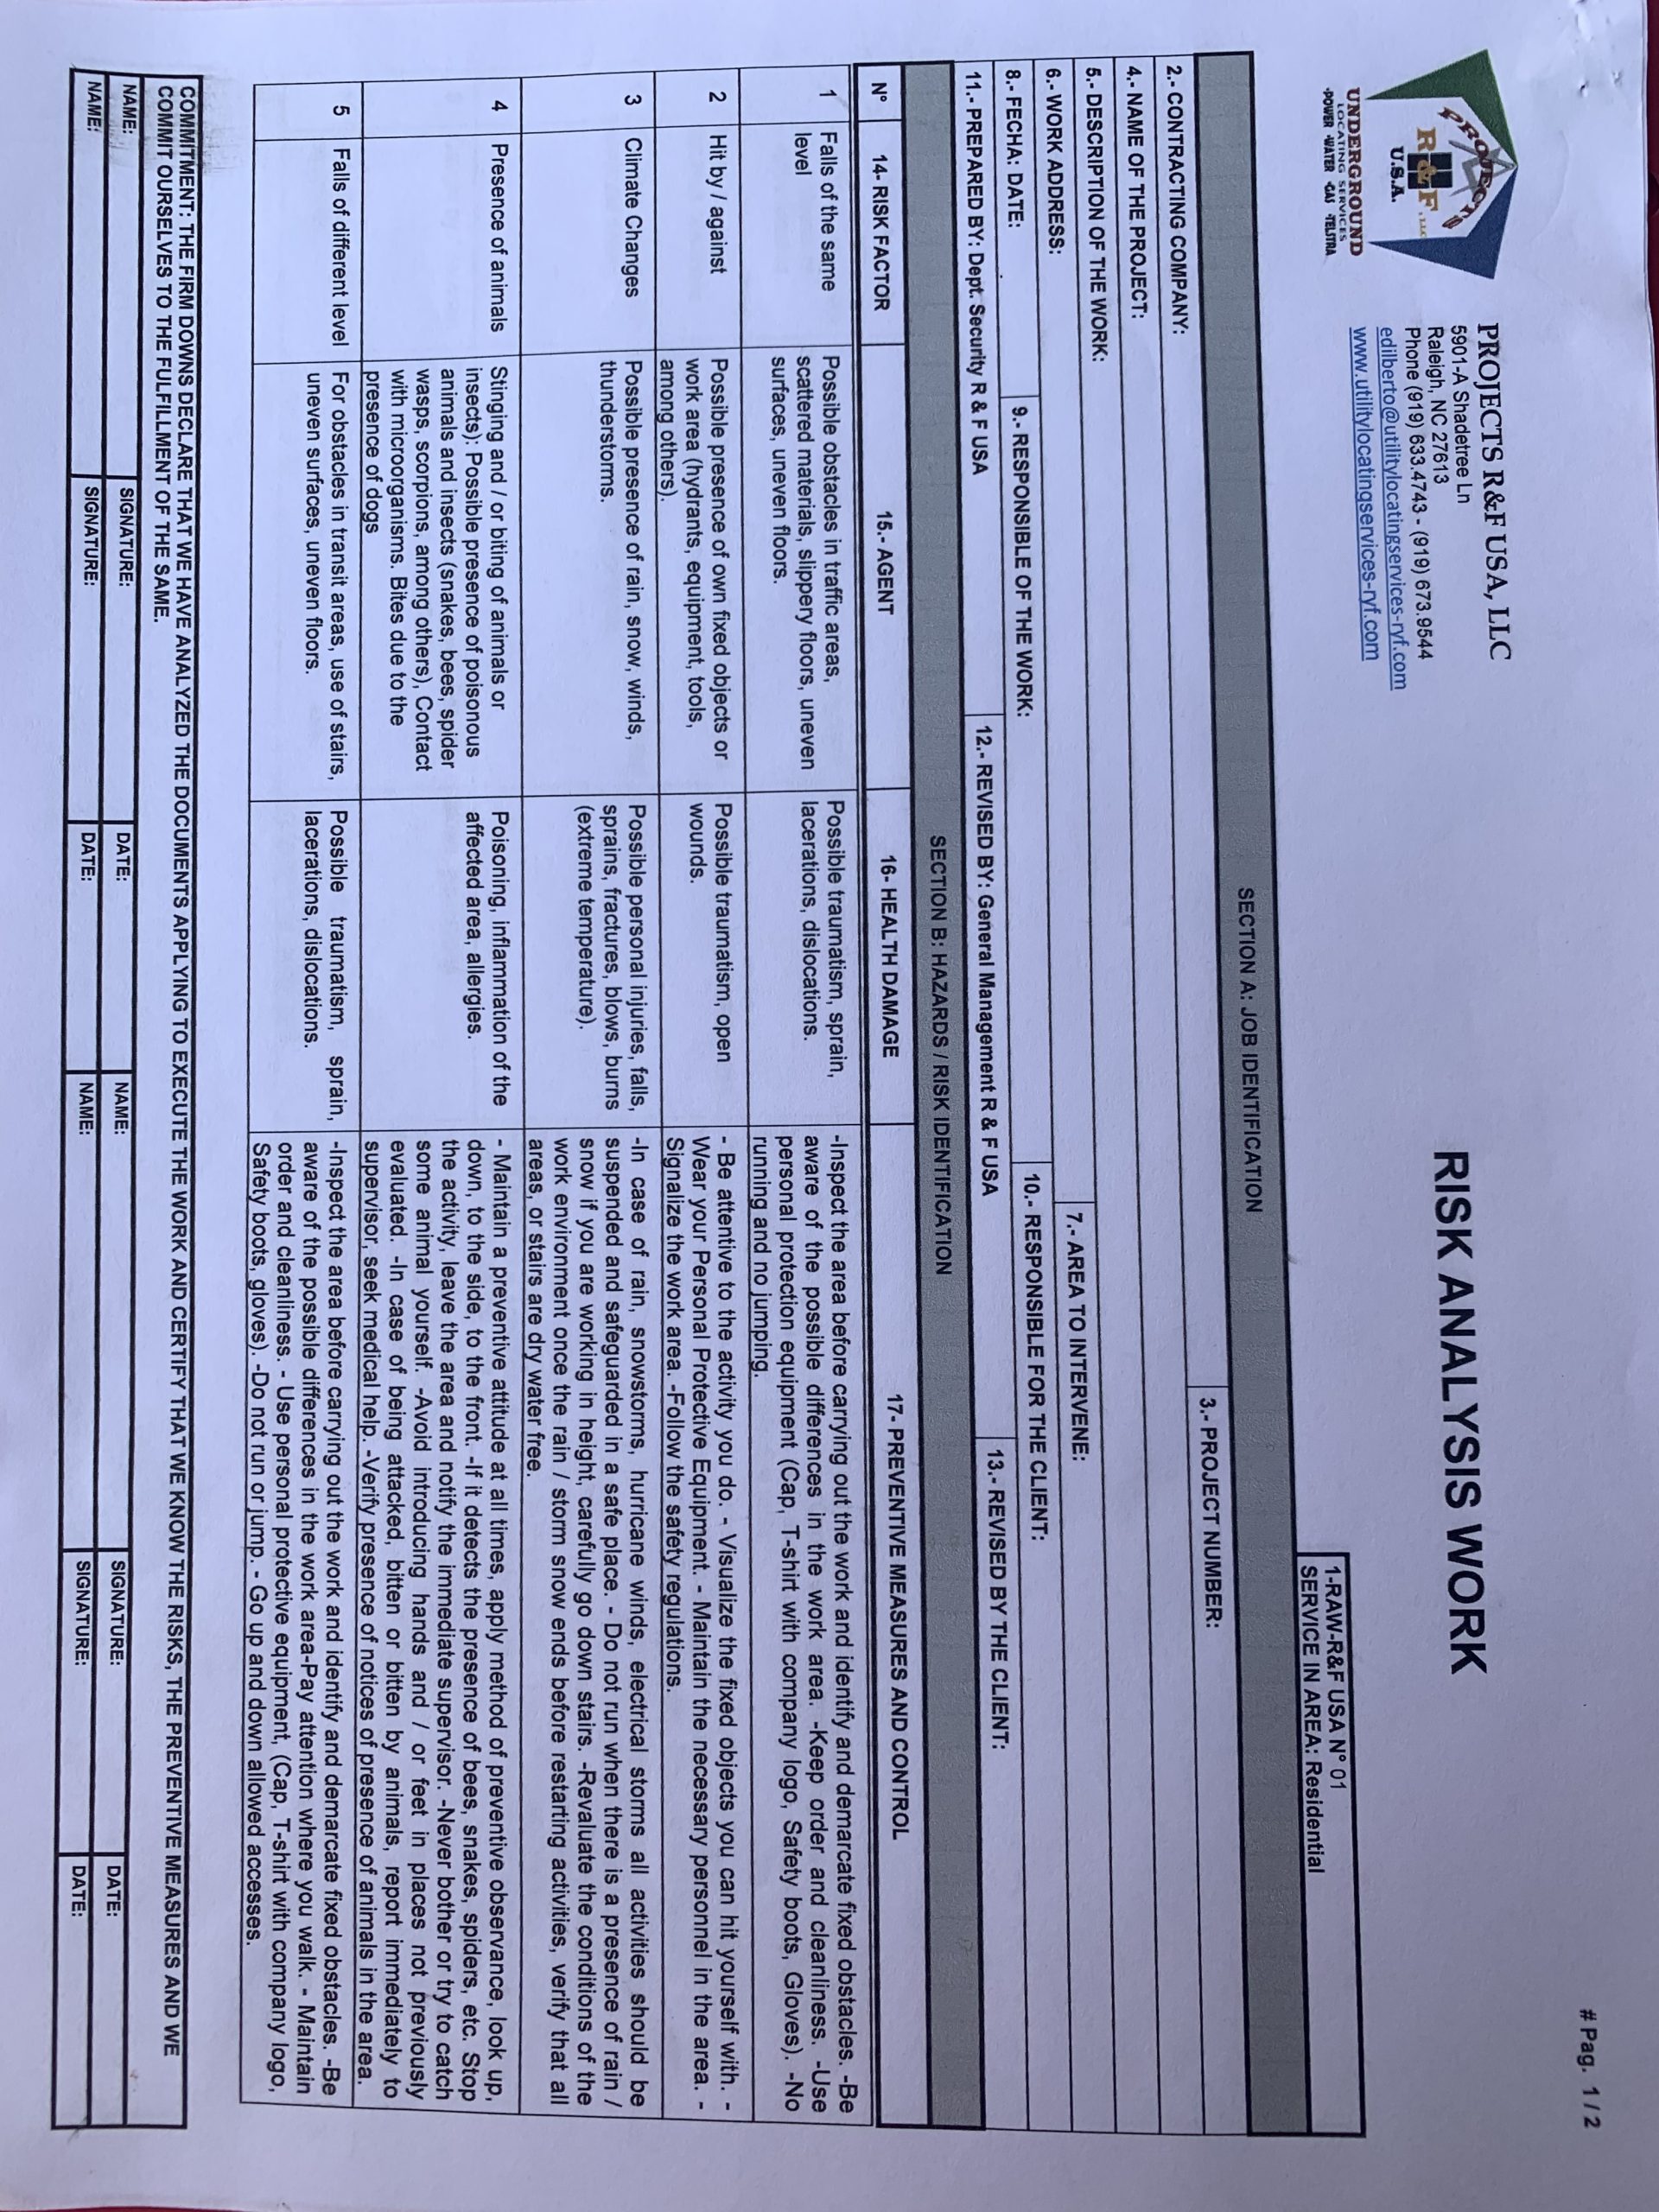 PROJECTS R&F USA. Image 2. PROJECT R&F USA´s form for Risks Analysis. (Apr2019)